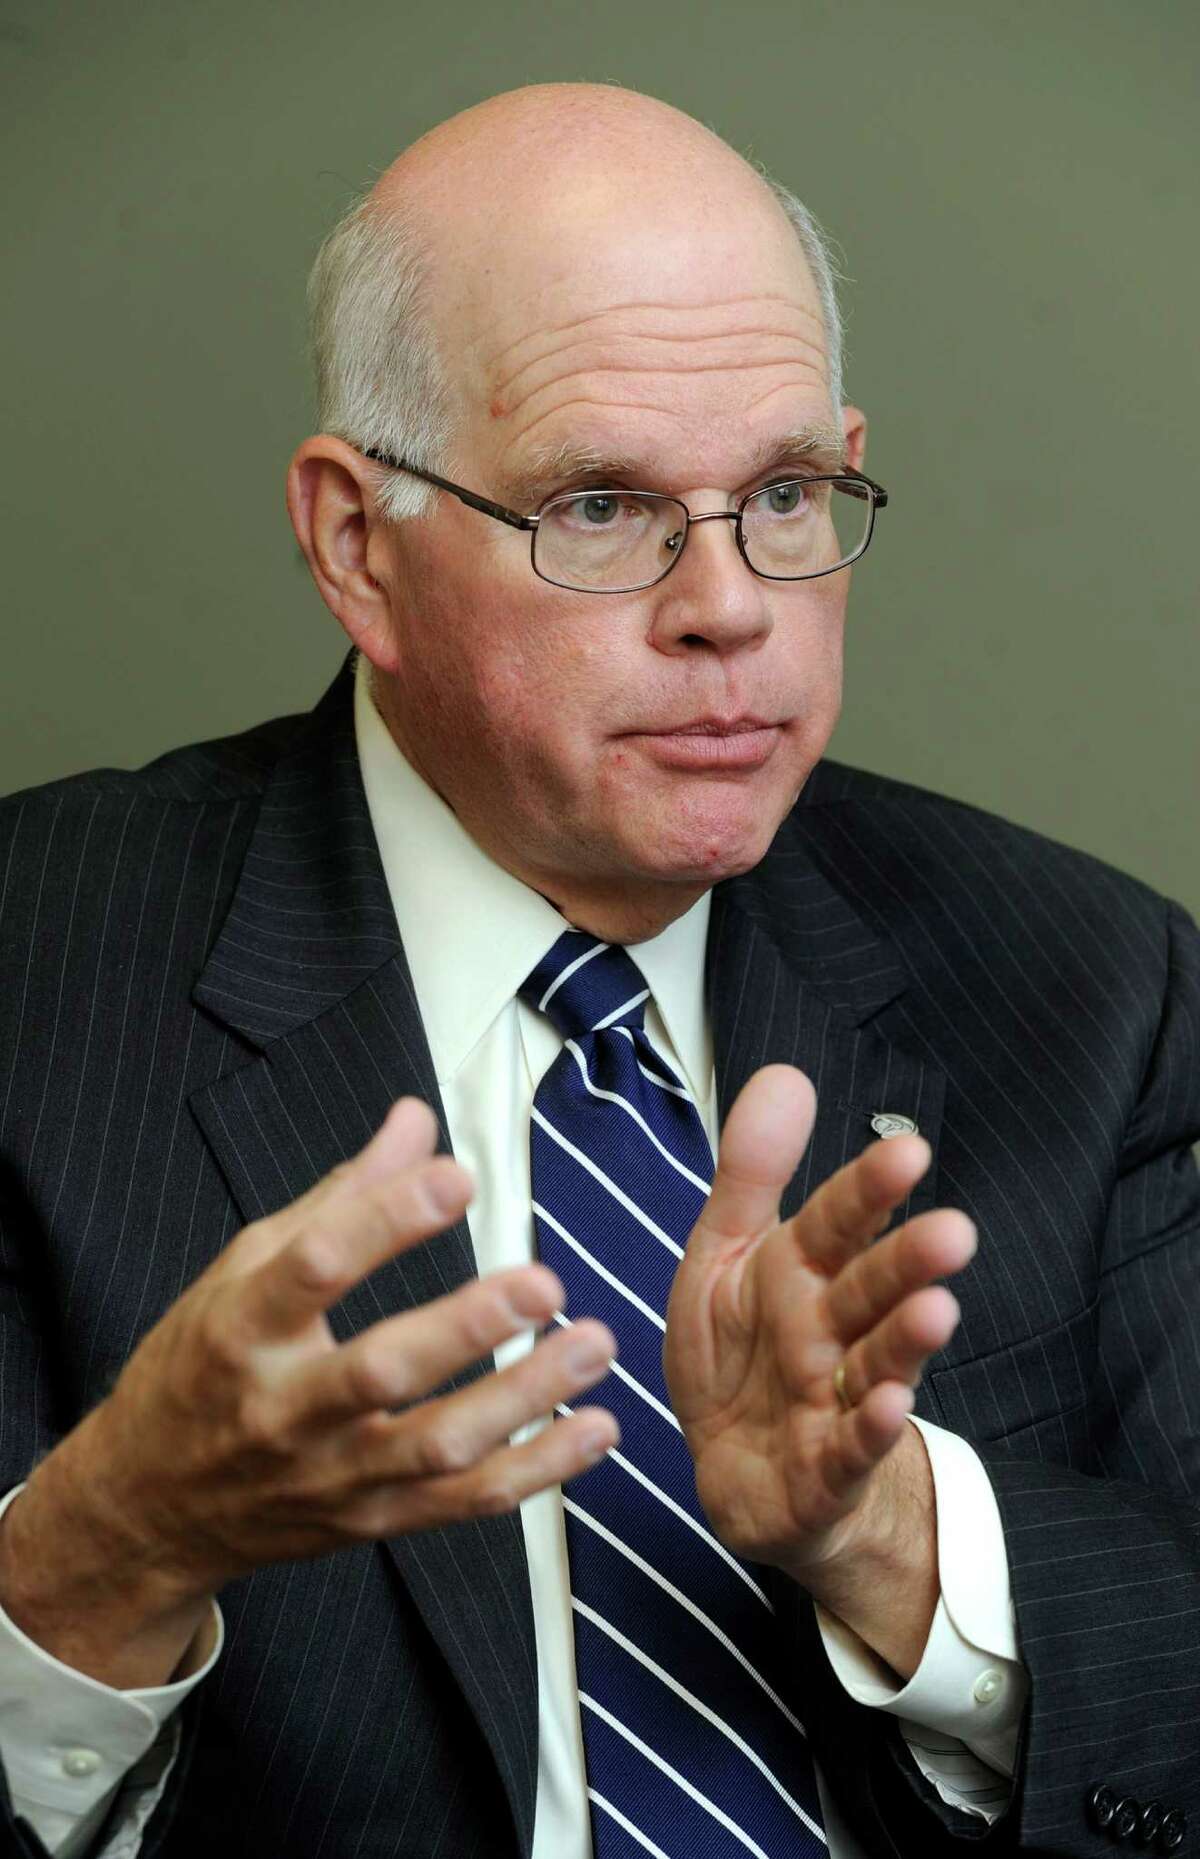 Fran Dattalo, chief executive officer of Union Savings Bank in Danbury, Conn., will continue in that role until his retirement at the end of the year. He meets with The News-Times Tuesday, April 22, 2014.